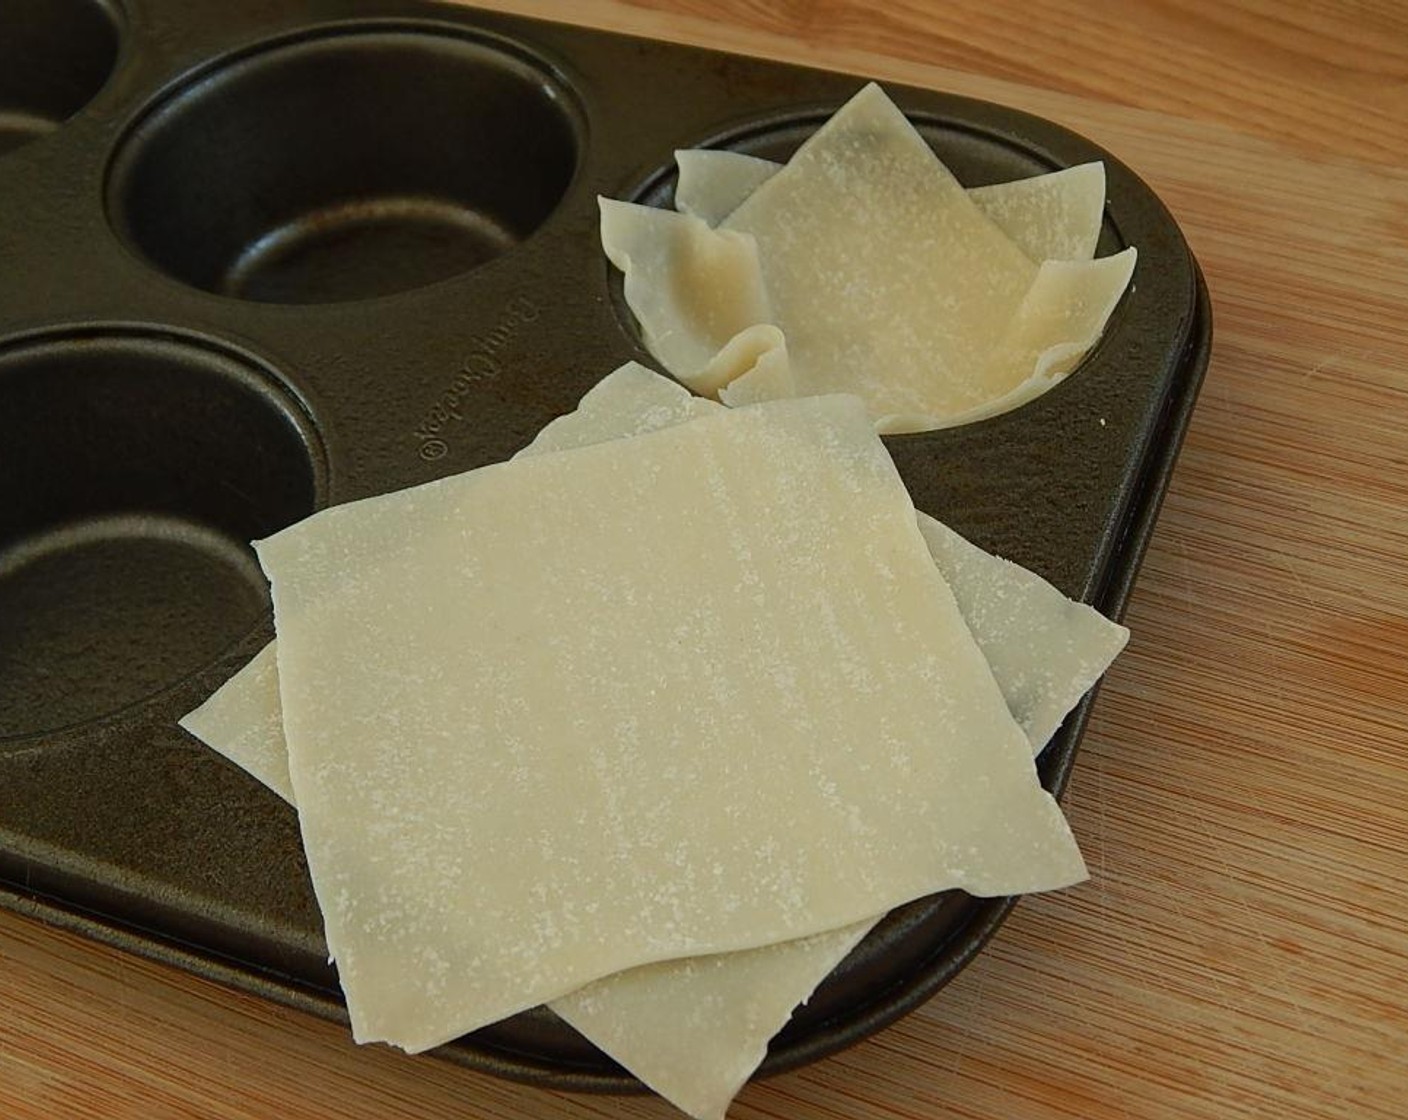 step 4 Spray a 6 hole regular muffin pan with non stick cooking spray. Use 2 Wonton Wrappers (12), push down into muffin cup, lightly spray the wonton wrappers.